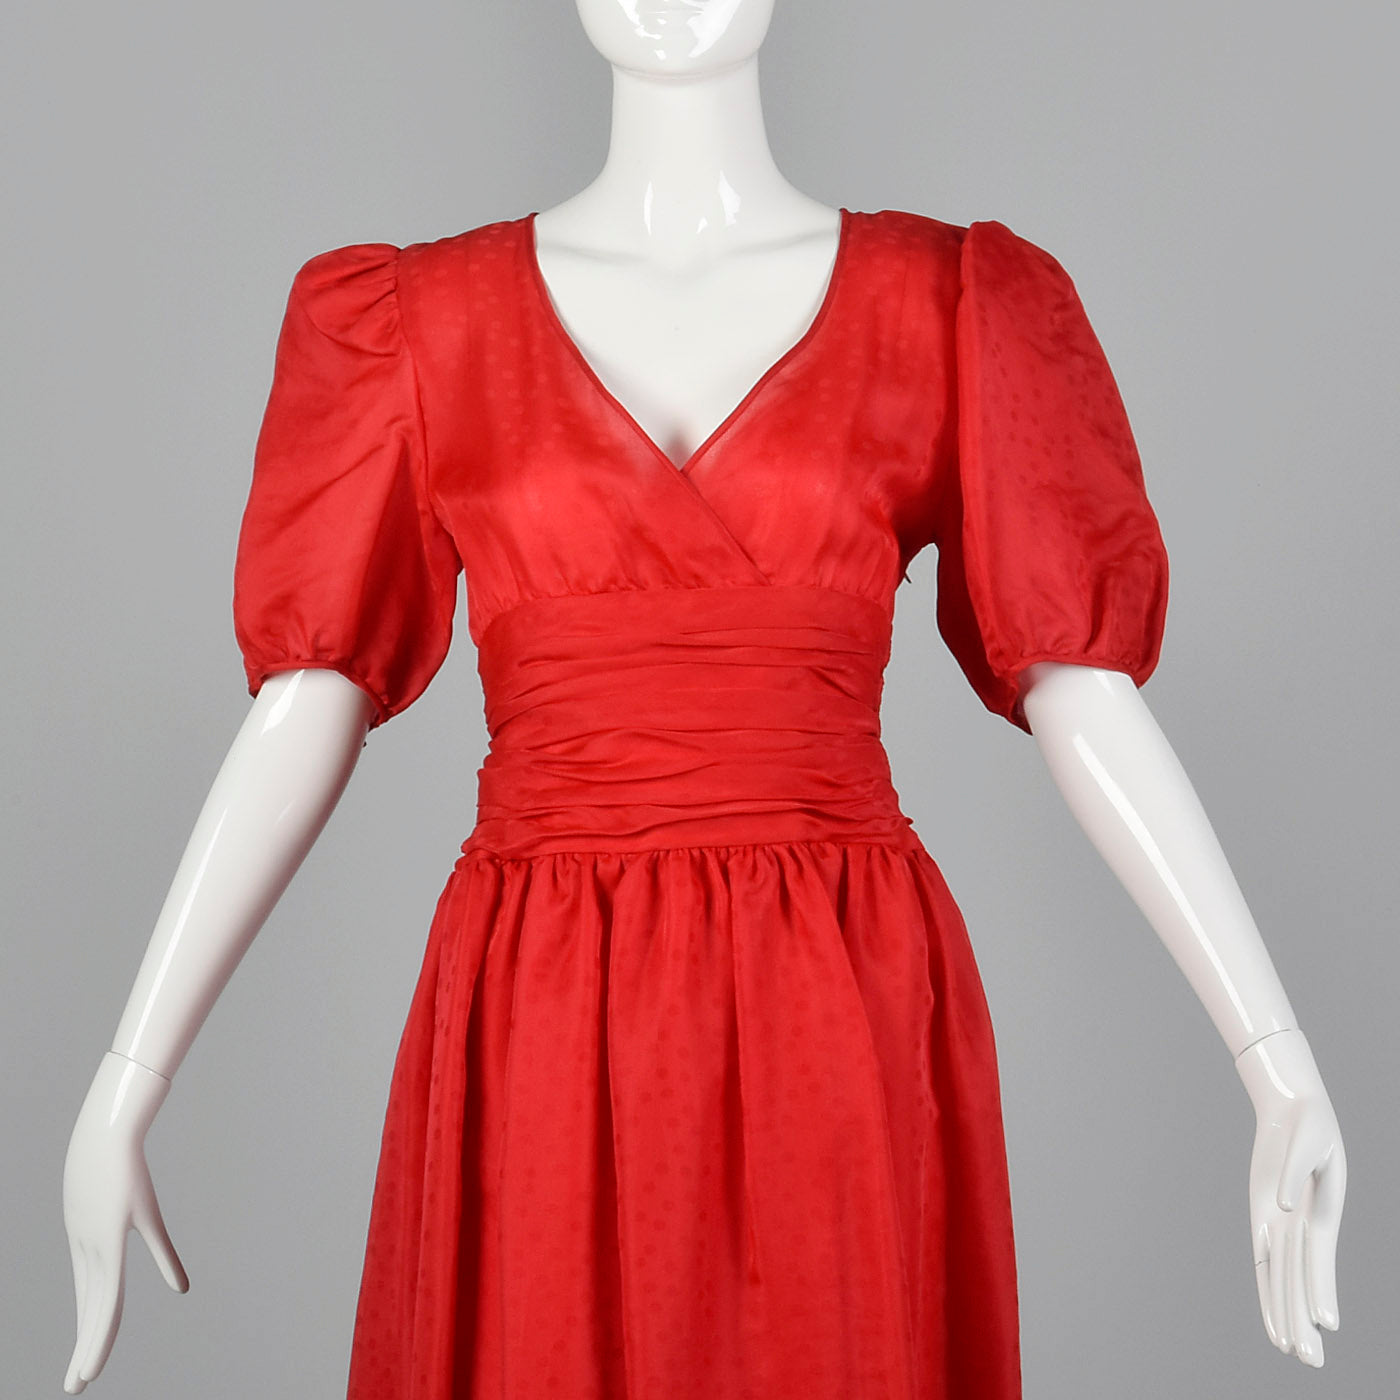 1980s Red Party Dress with Polka Dots